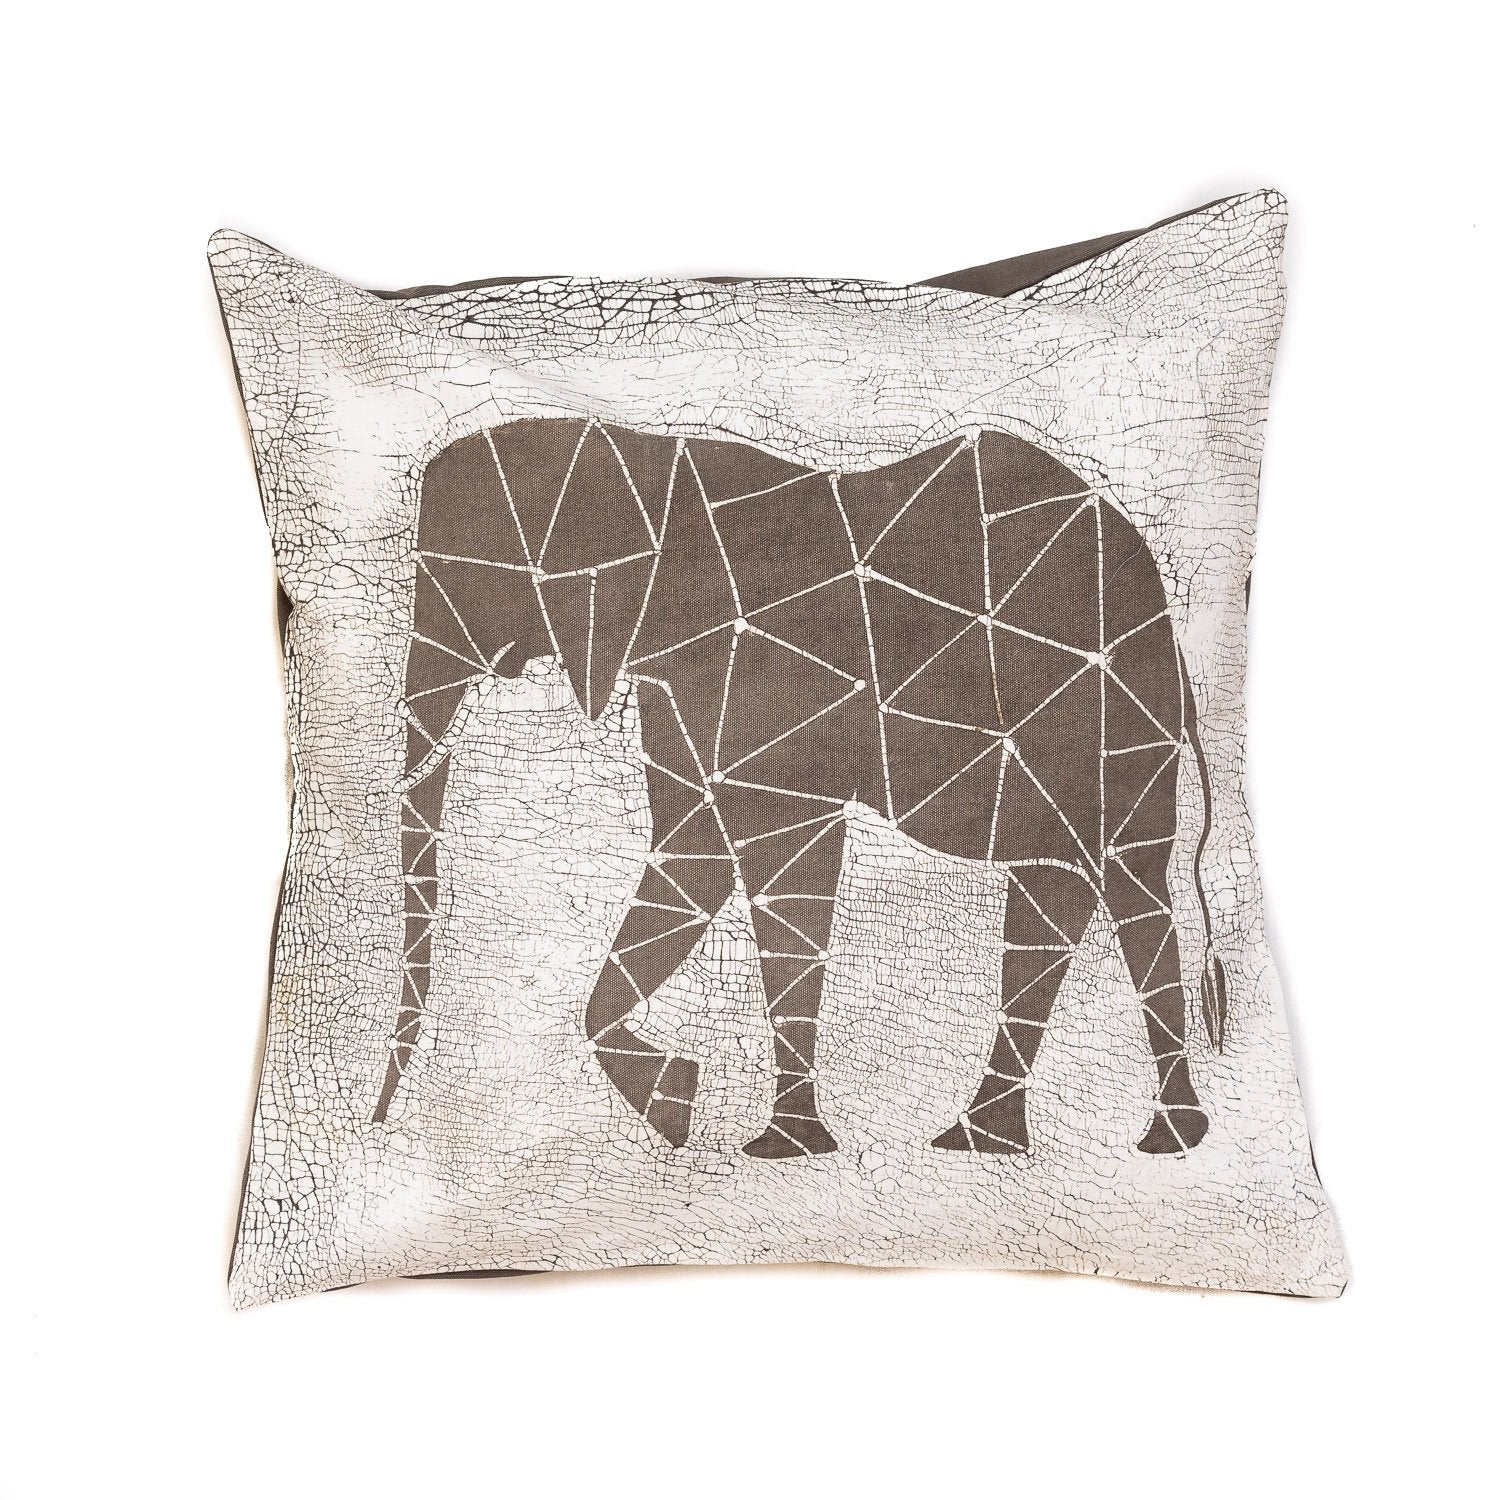 Crackle Animals Elephant Light Grey Cushion Cover - Handmade by TRIBAL TEXTILES - Handcrafted Home Decor Interiors - African Made